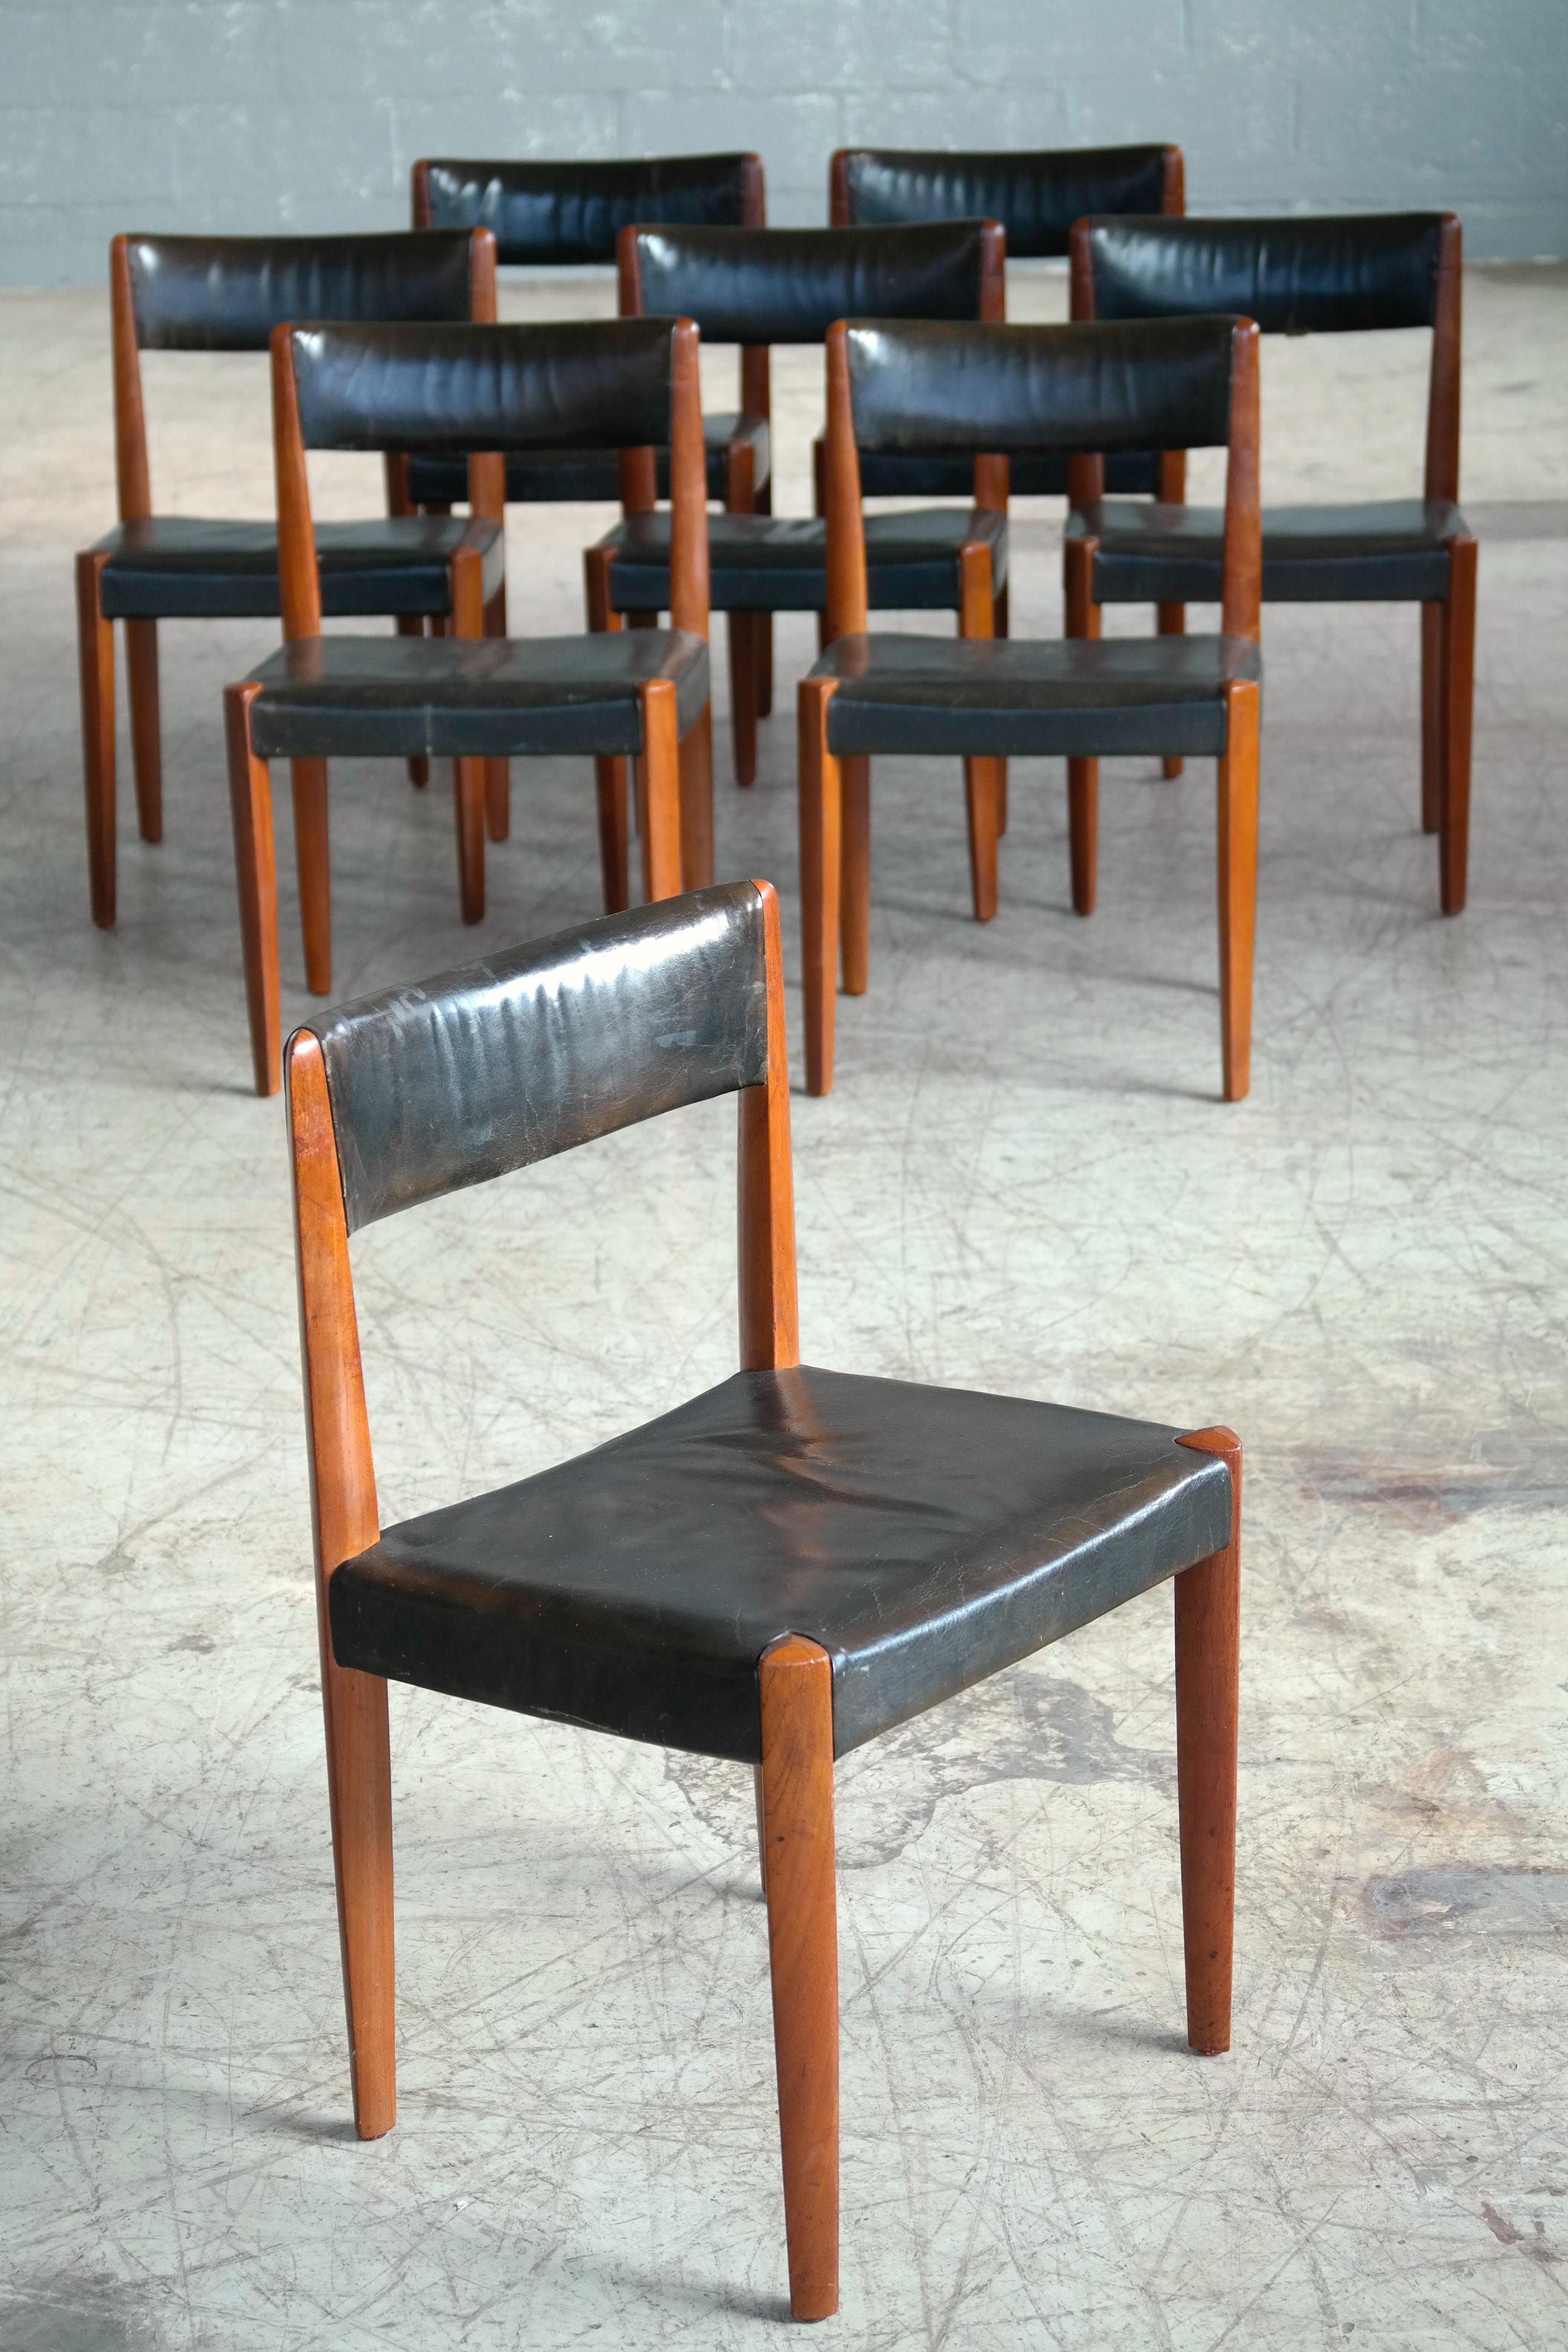 Beautiful and rare set of 8 dining chairs designed by Aage Schmidt Christensen and manufactured by Fritz Hansen as Model # 4112 in the 1950's. Solid carved teak teak with patent leather. The frames show beautiful angles and great color and patina.